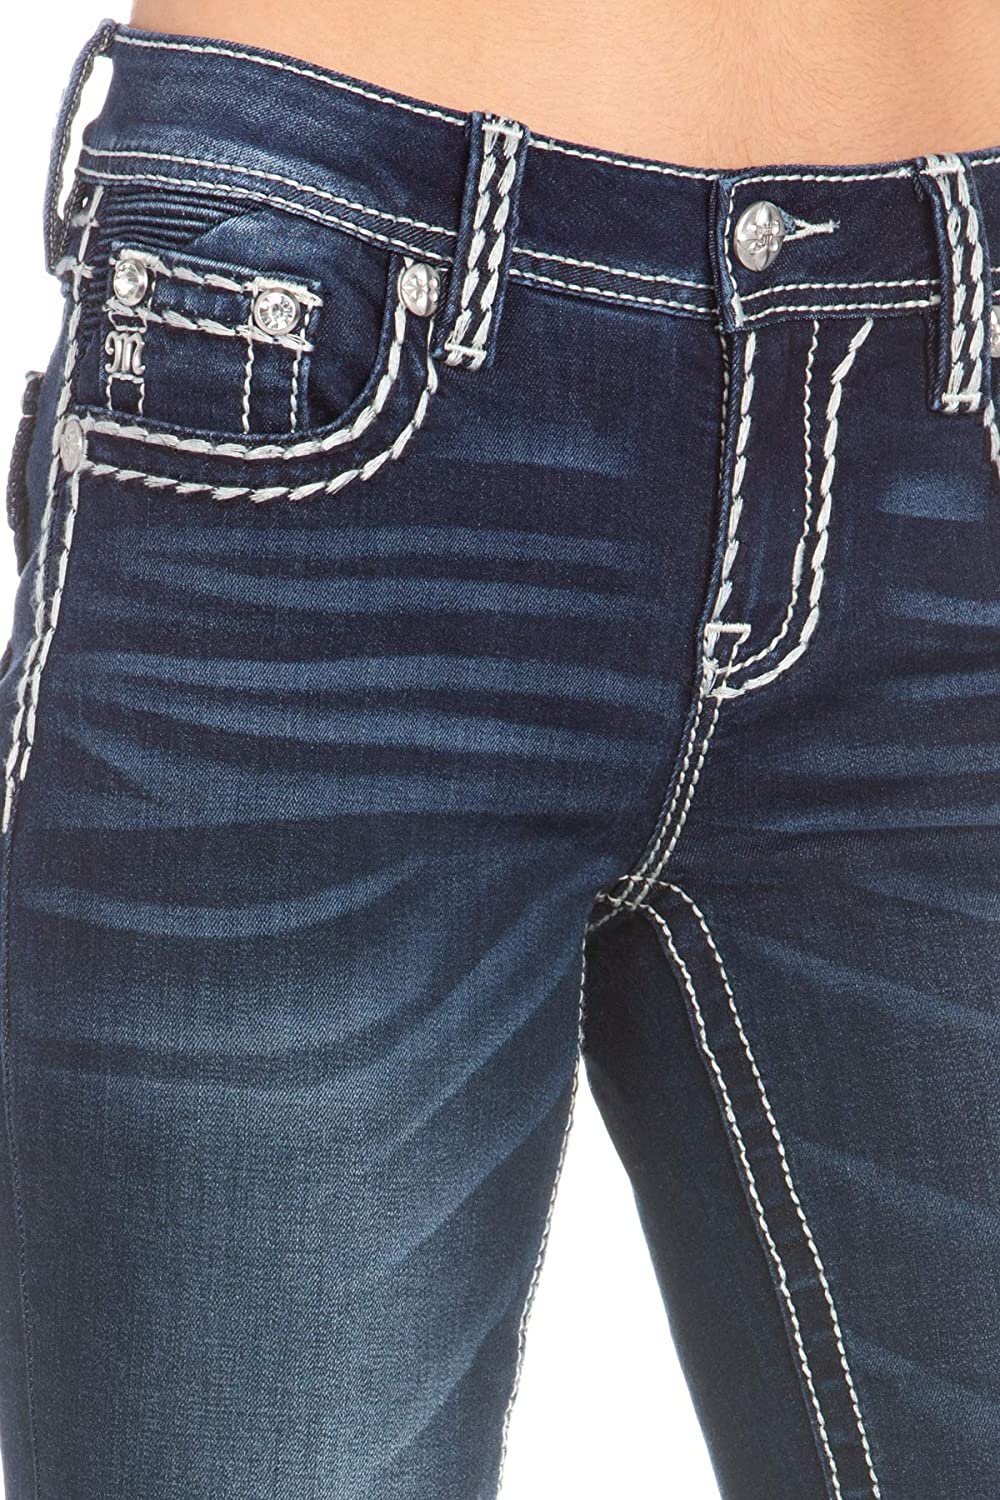 Classic Trend Bootcut Jeans